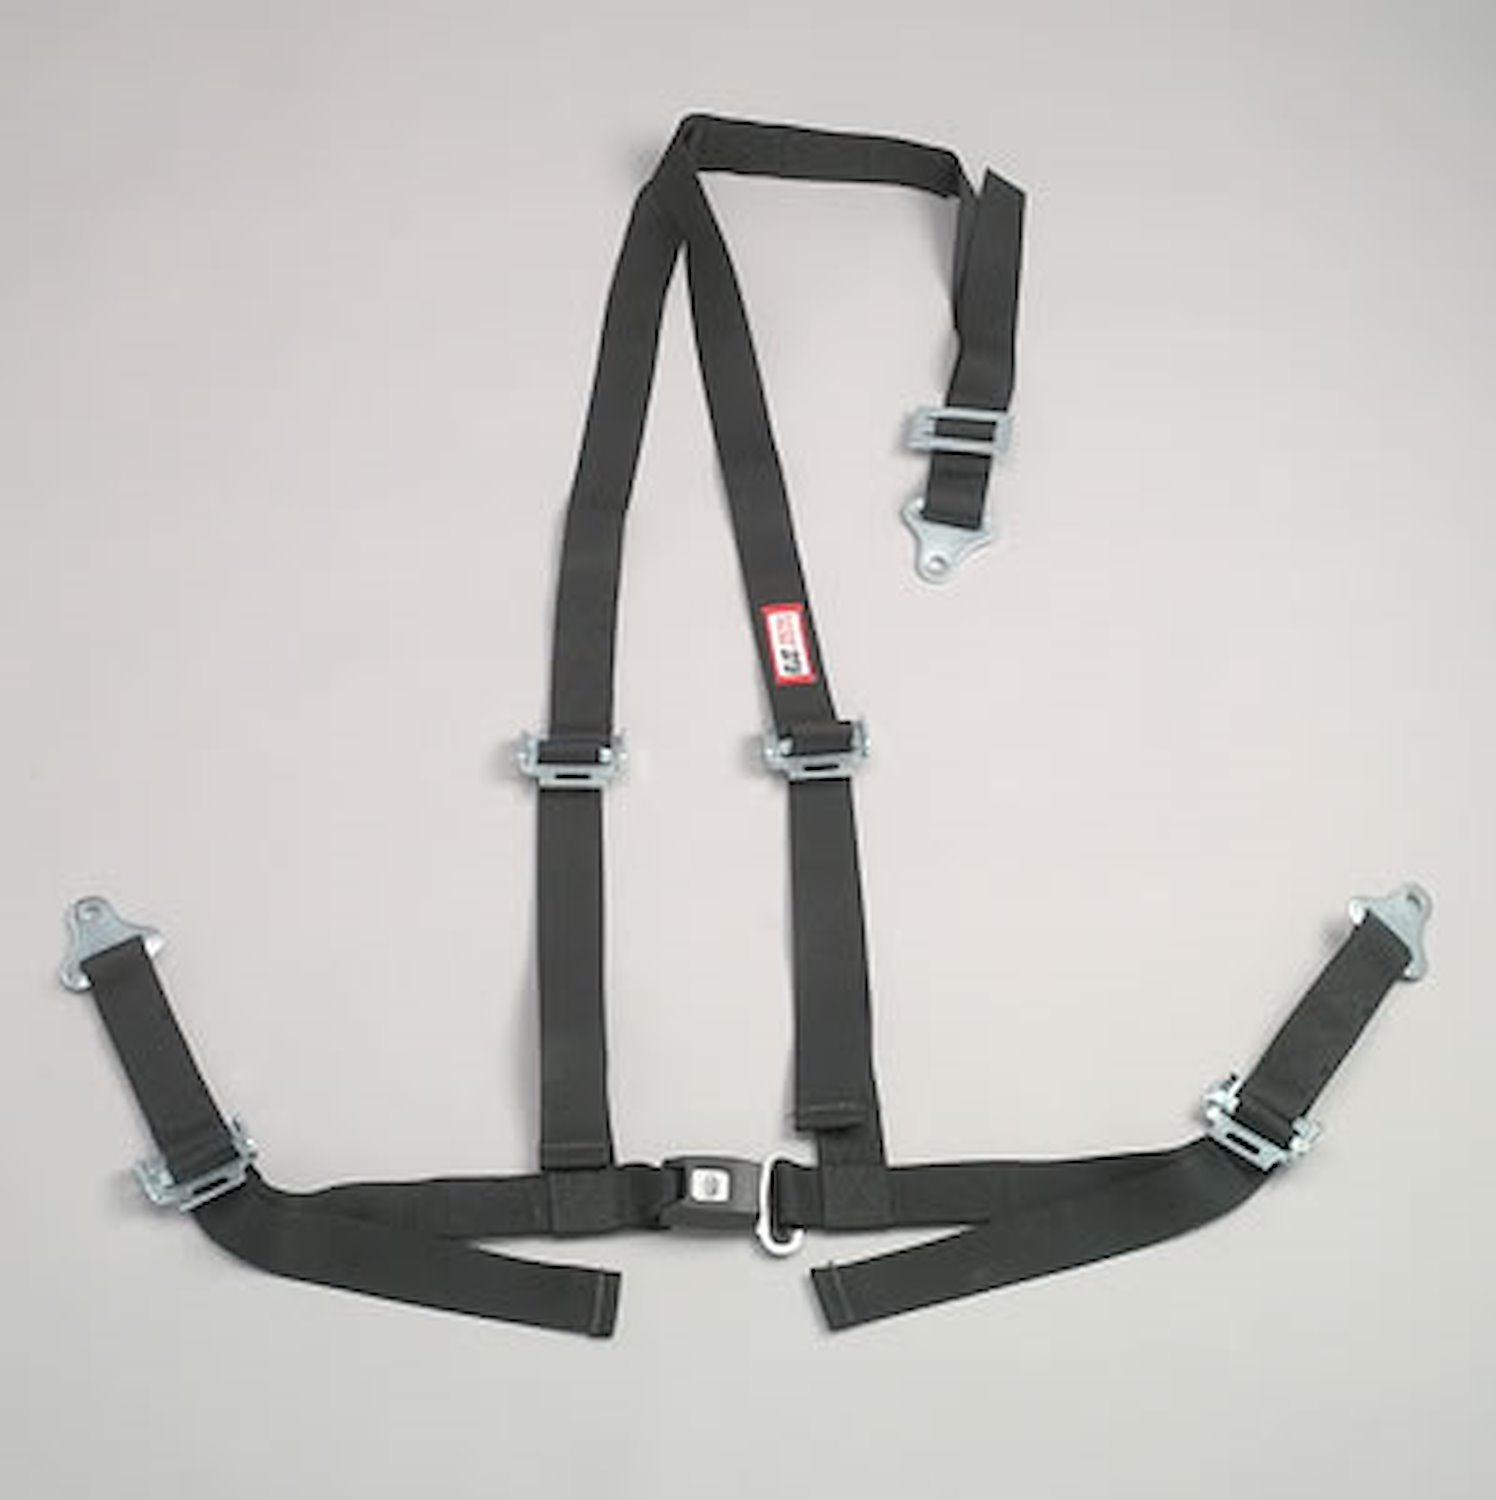 NON-SFI B&T HARNESS 2 PULL UP Lap Belt 2 S. H. Individual FLOOR Mount ALL WRAP ENDS w/STERNUM STRAP BLACK